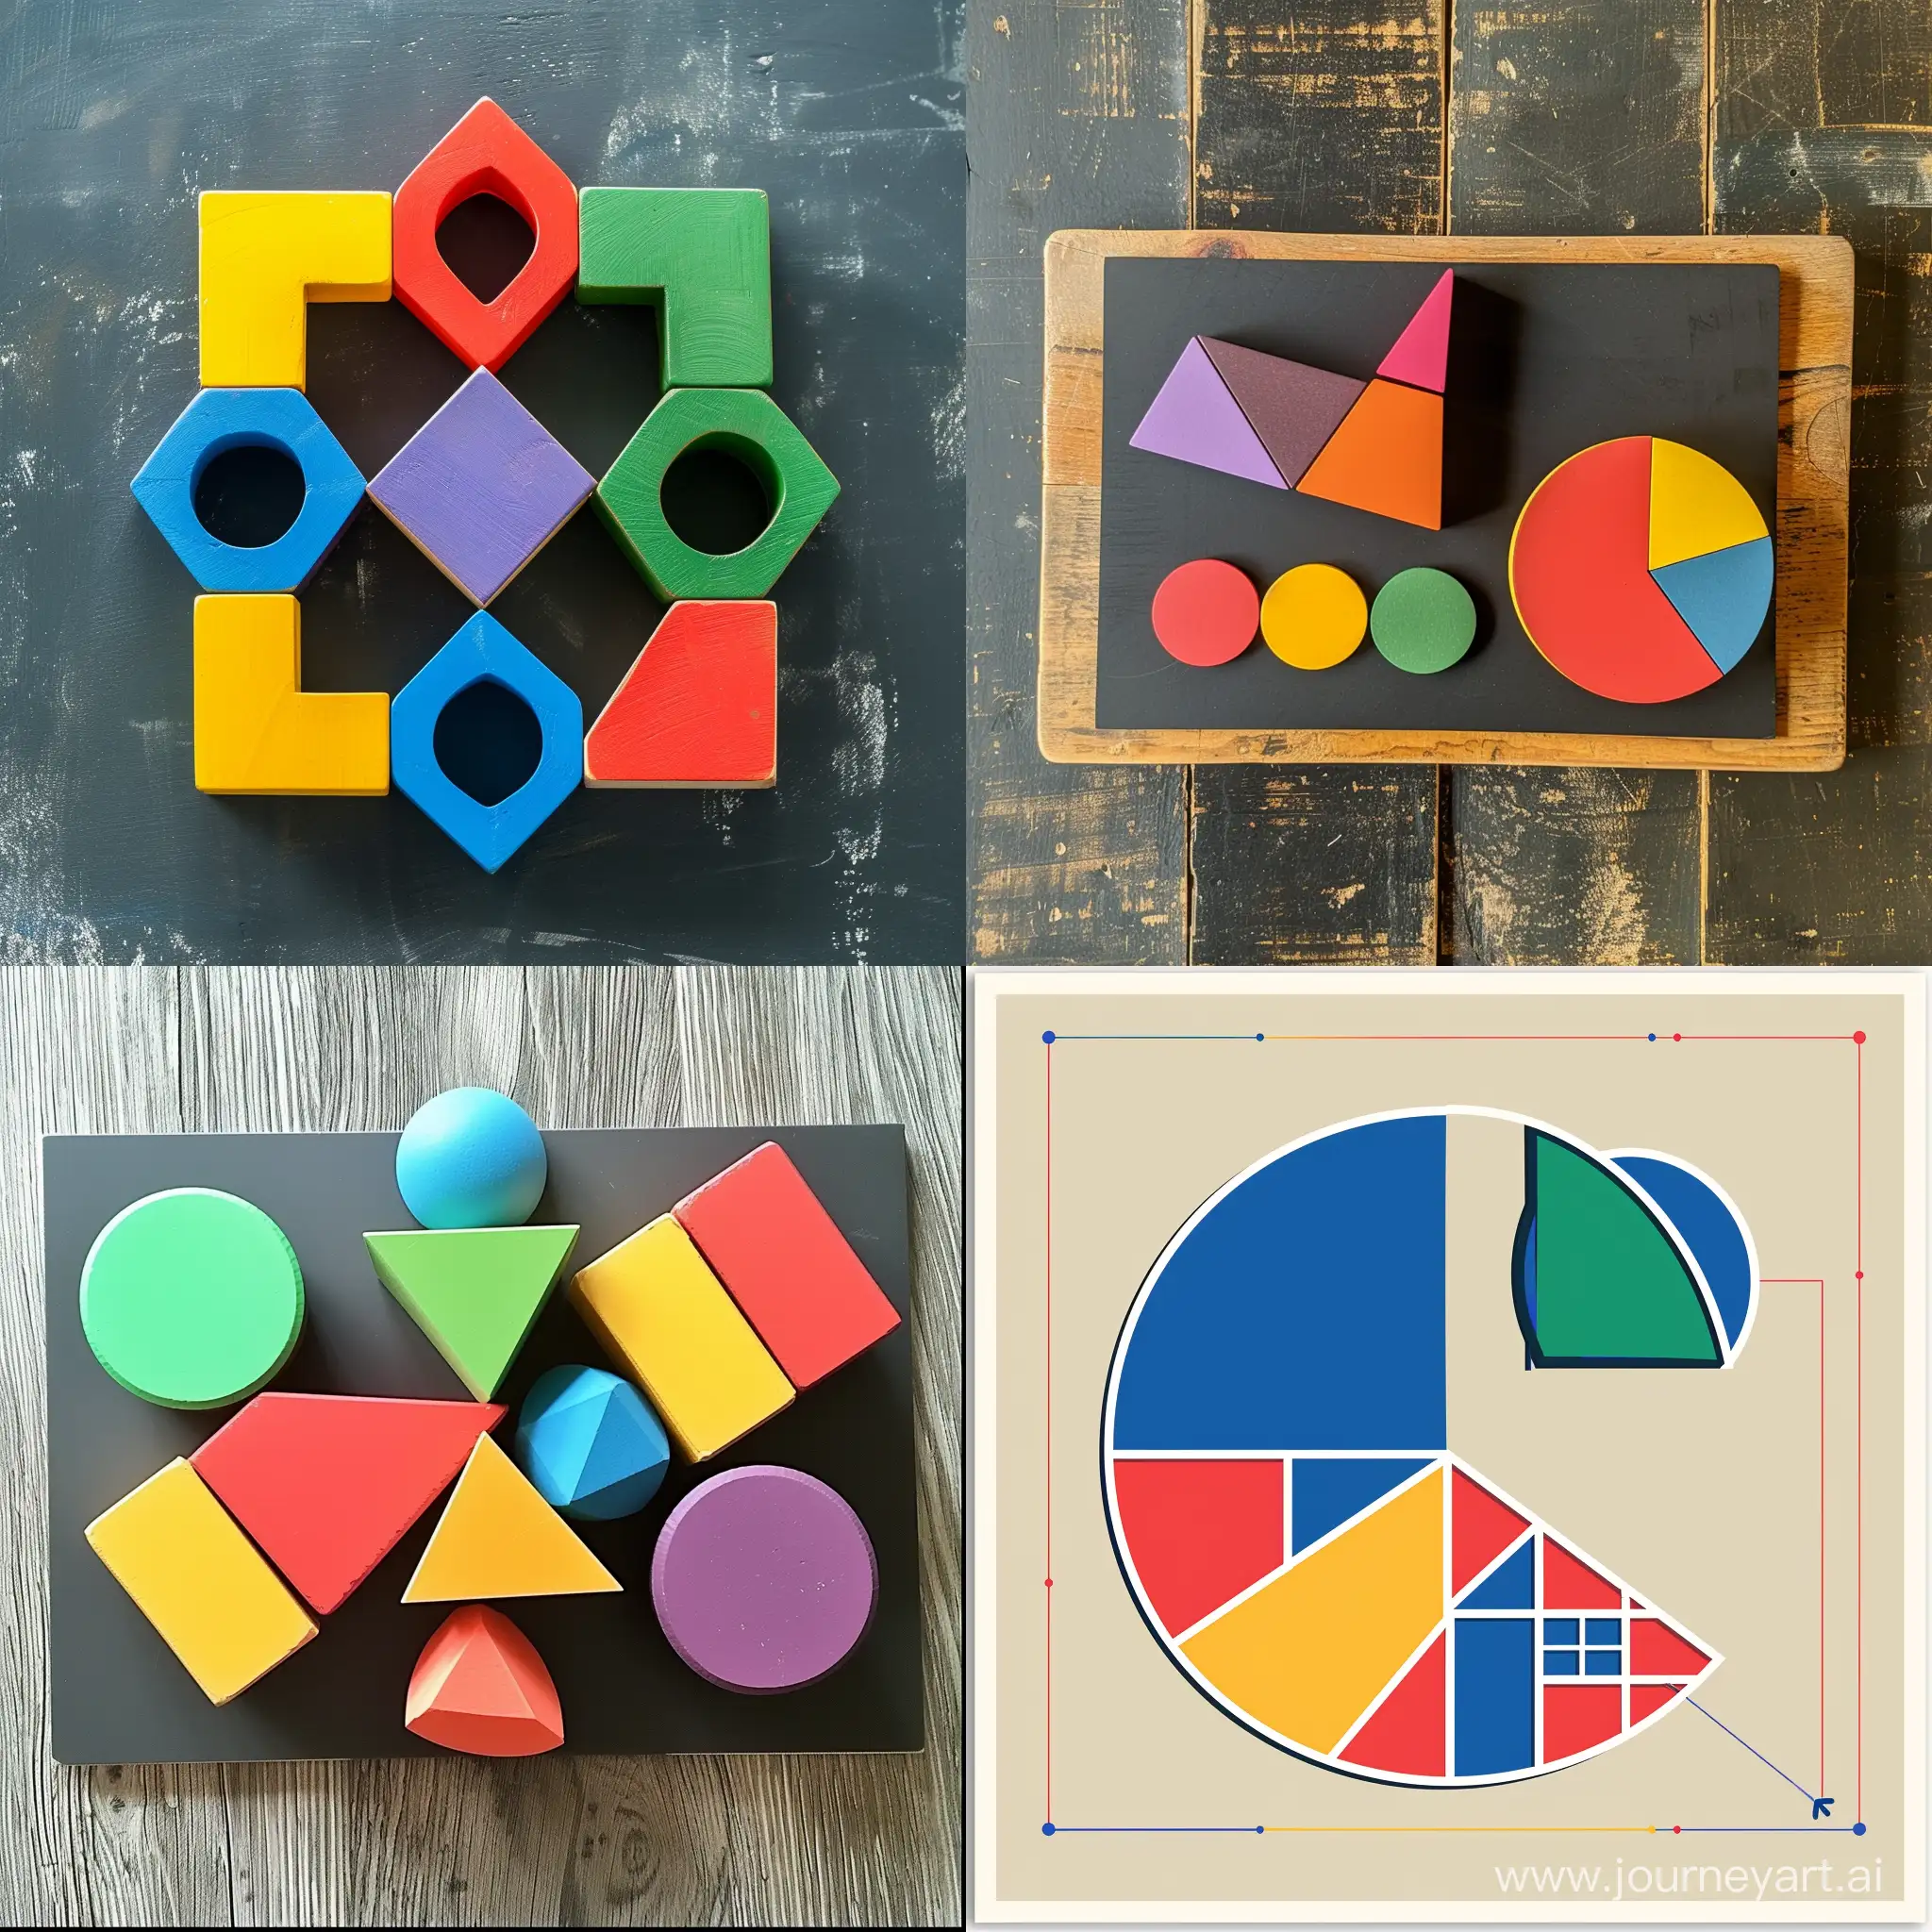 Geometric-Learning-Fun-for-Kids-Explore-12-Shapes-in-Math